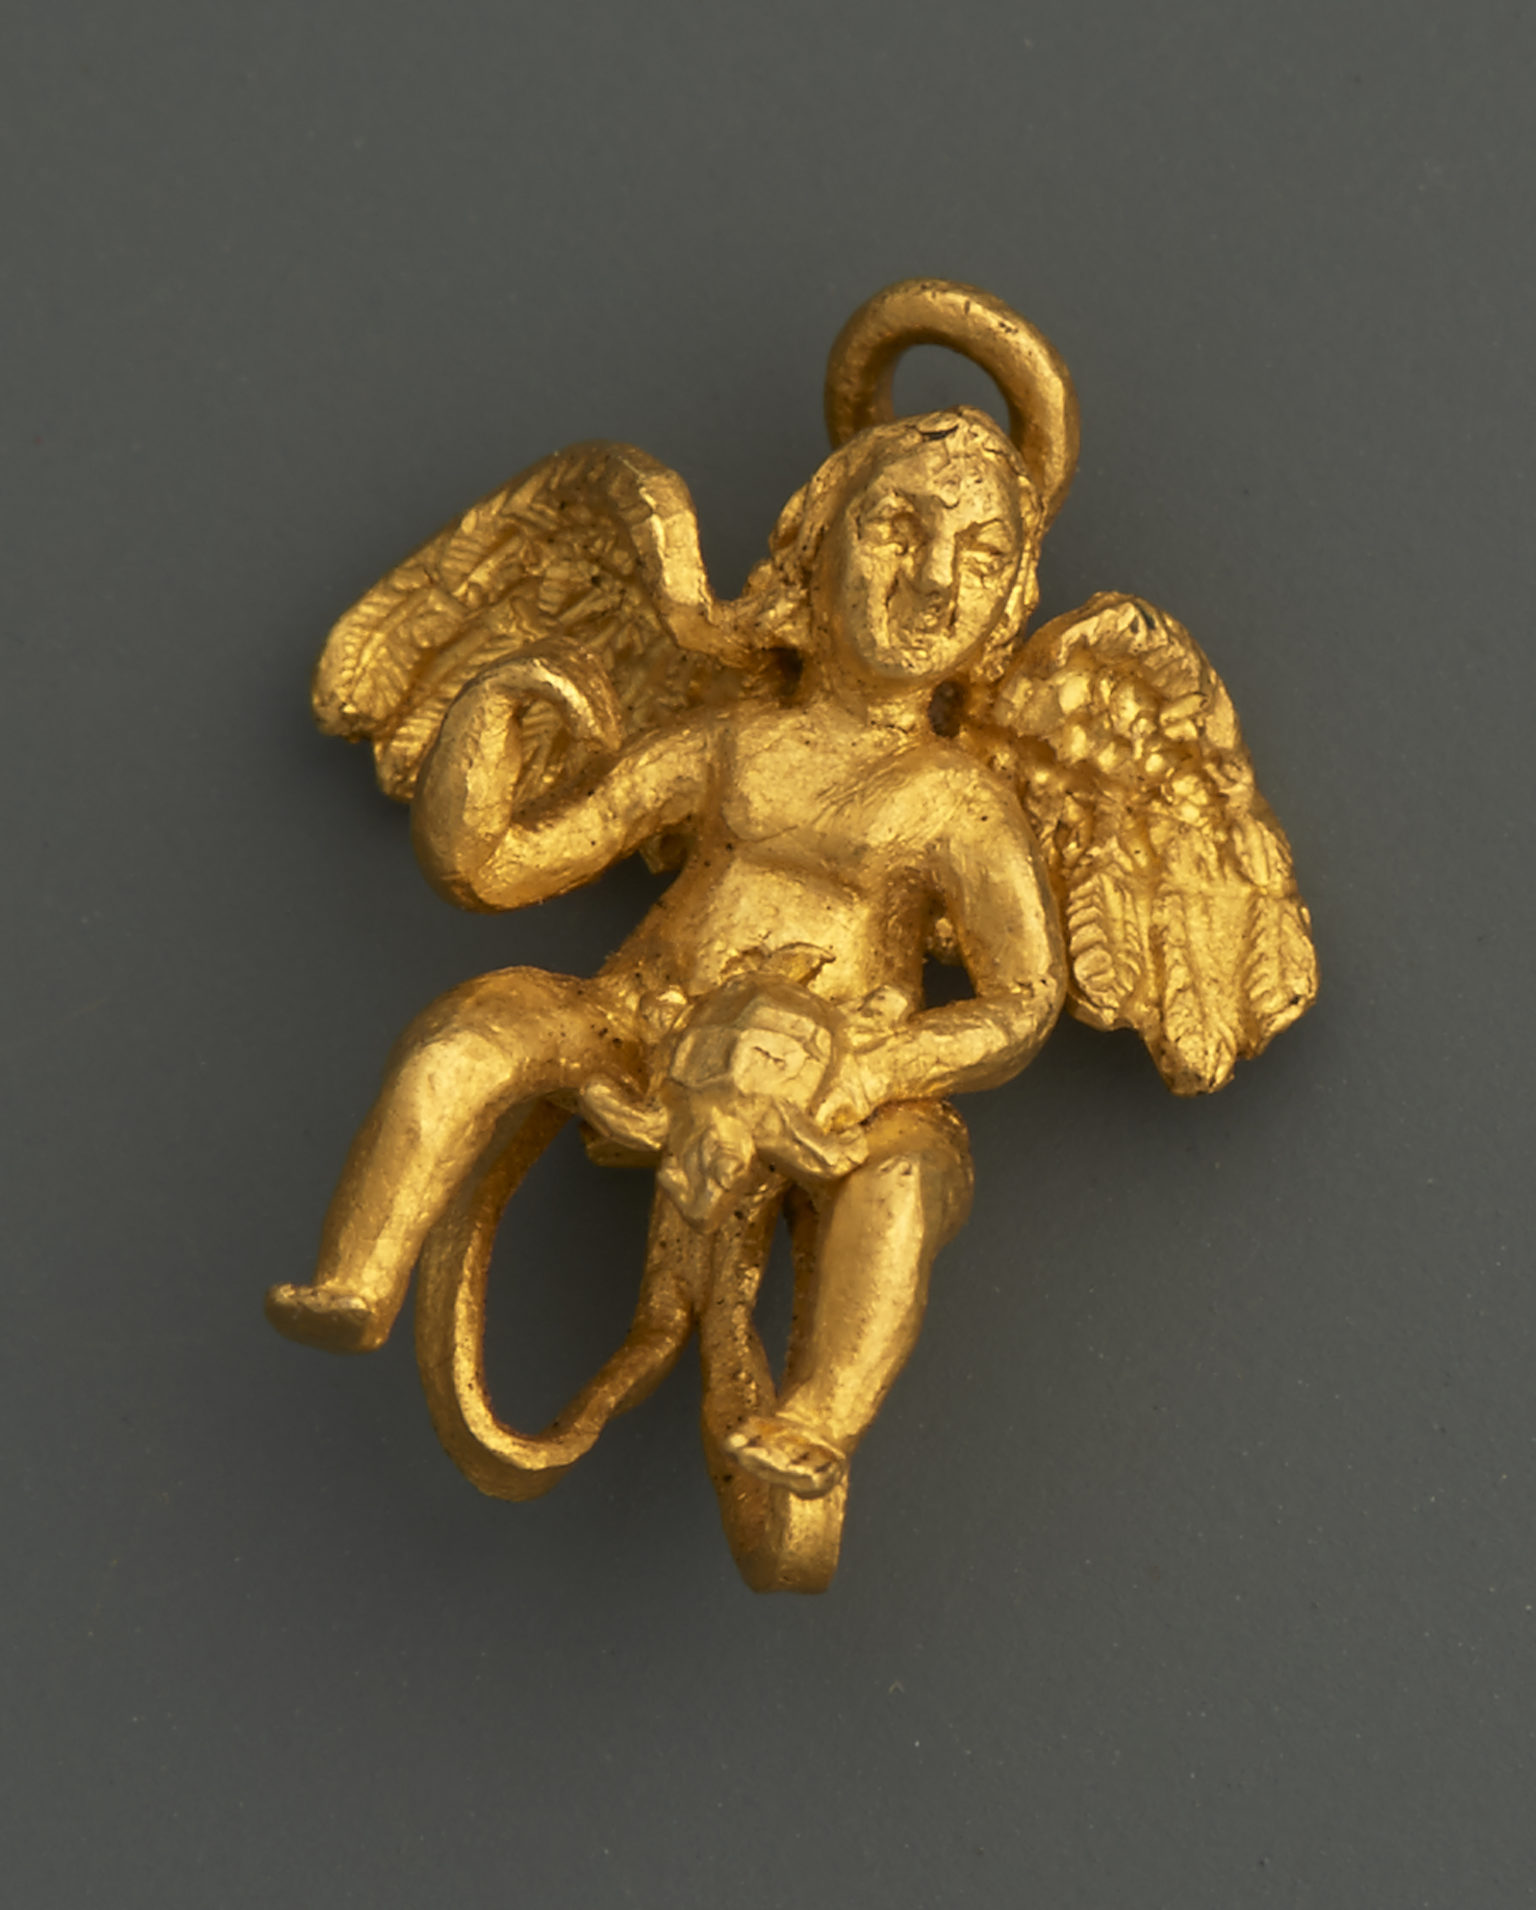 An Earring with Eros holding a Turtle